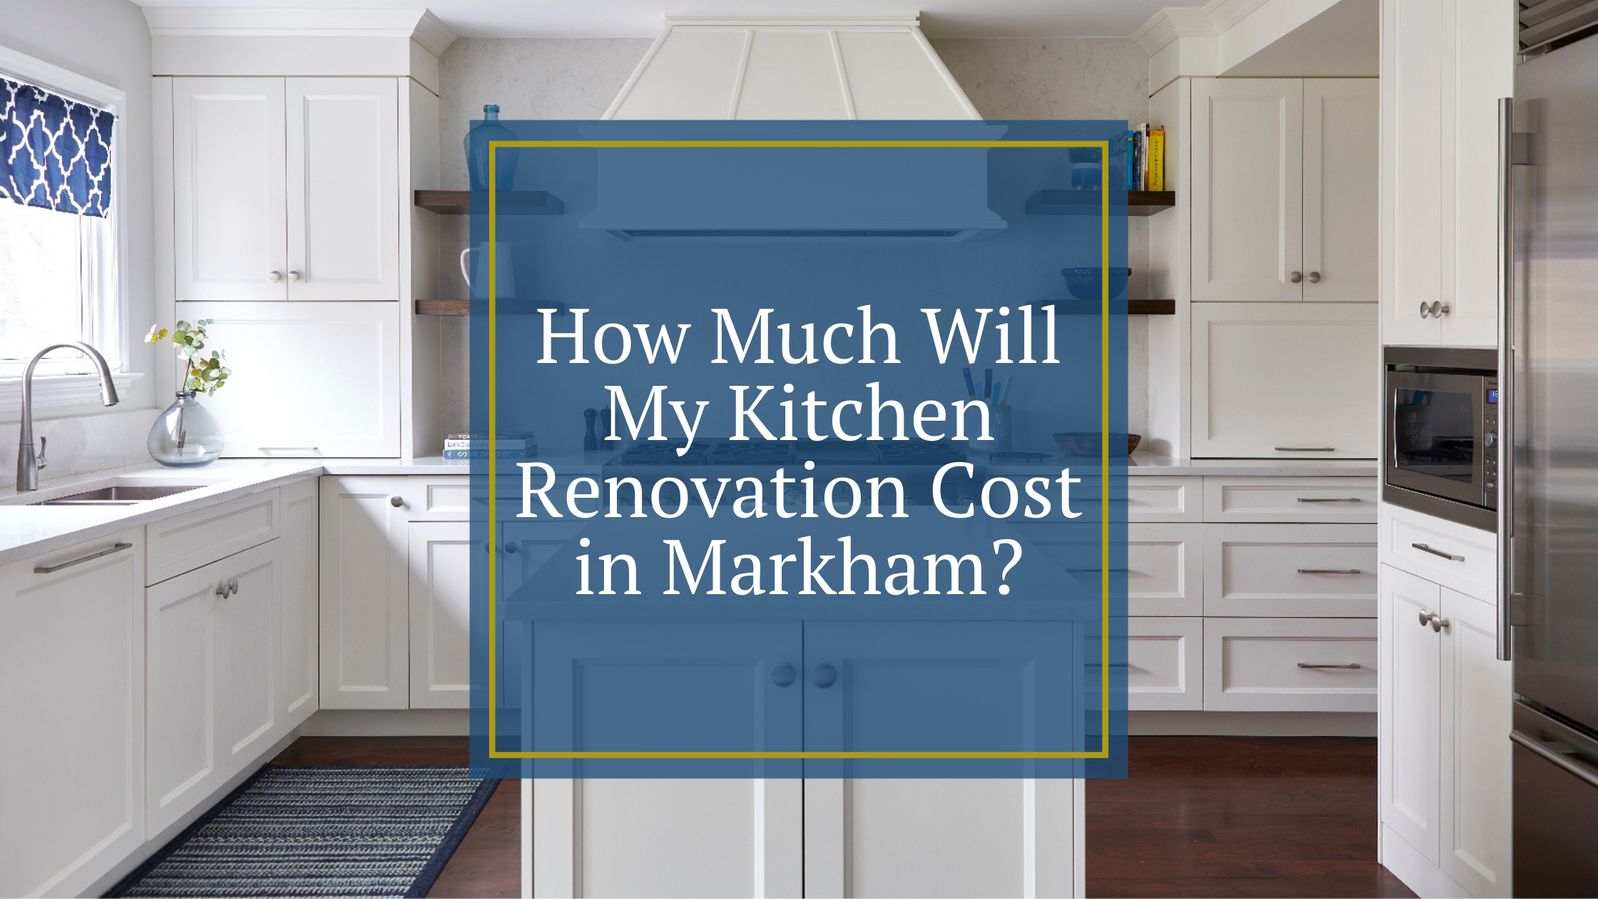 How Much Will My Kitchen Renovation Cost in Markham?